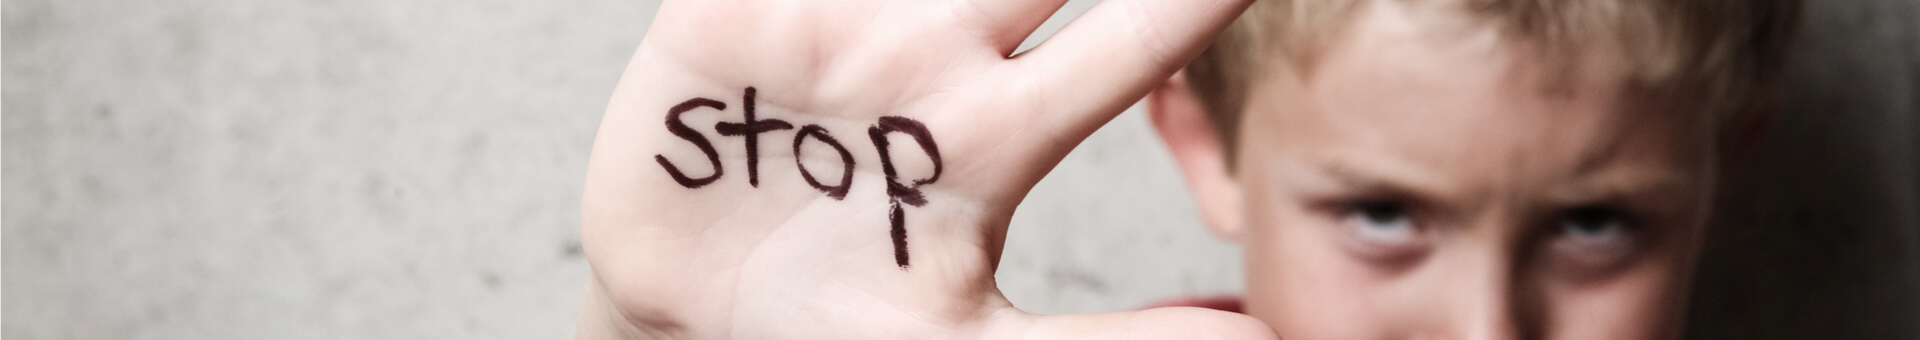 boy with stop sign on his hand